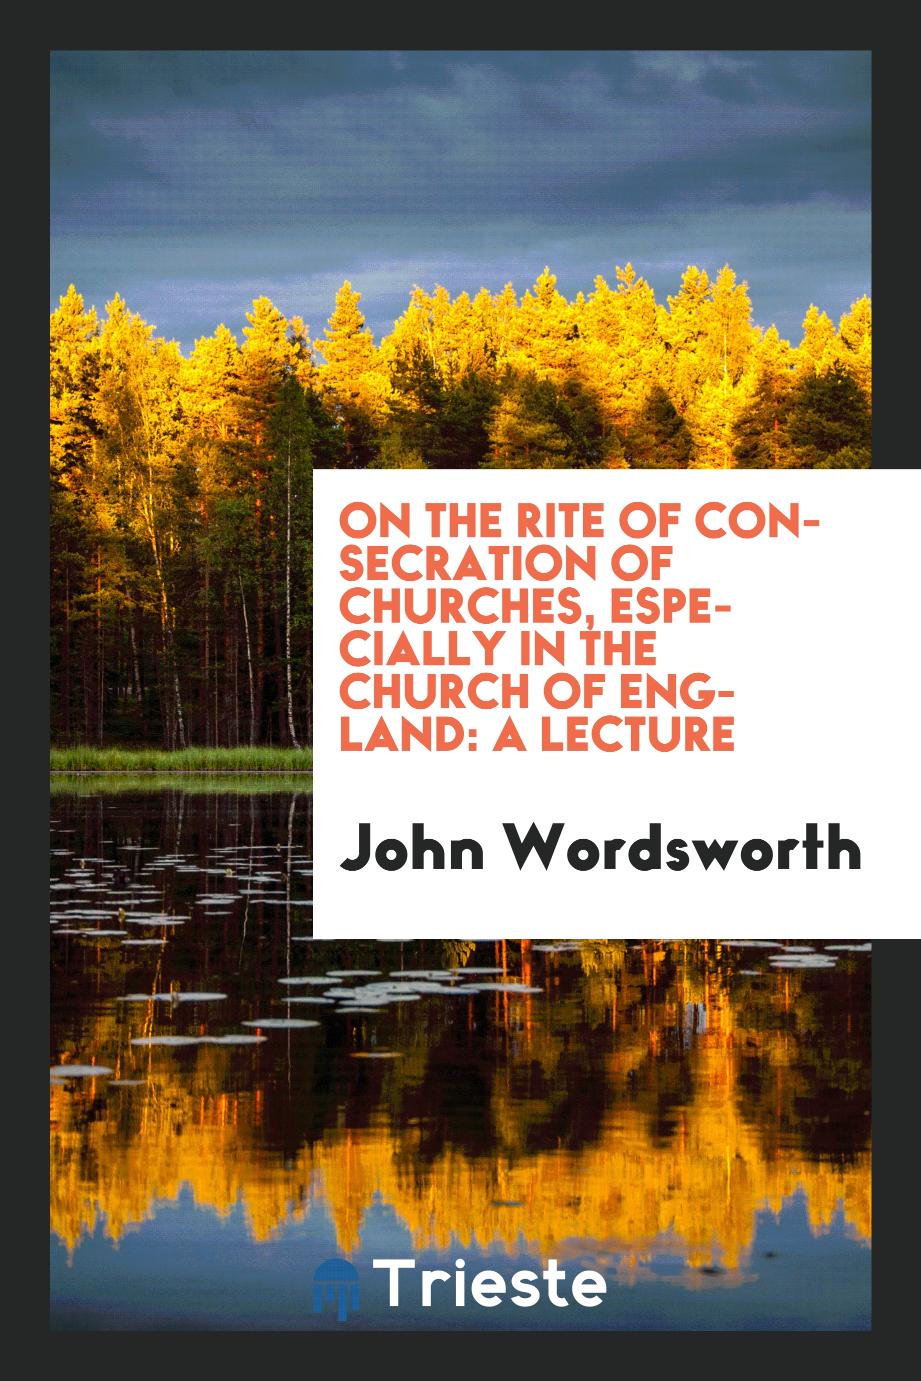 On the rite of consecration of churches, especially in the Church of England: a lecture